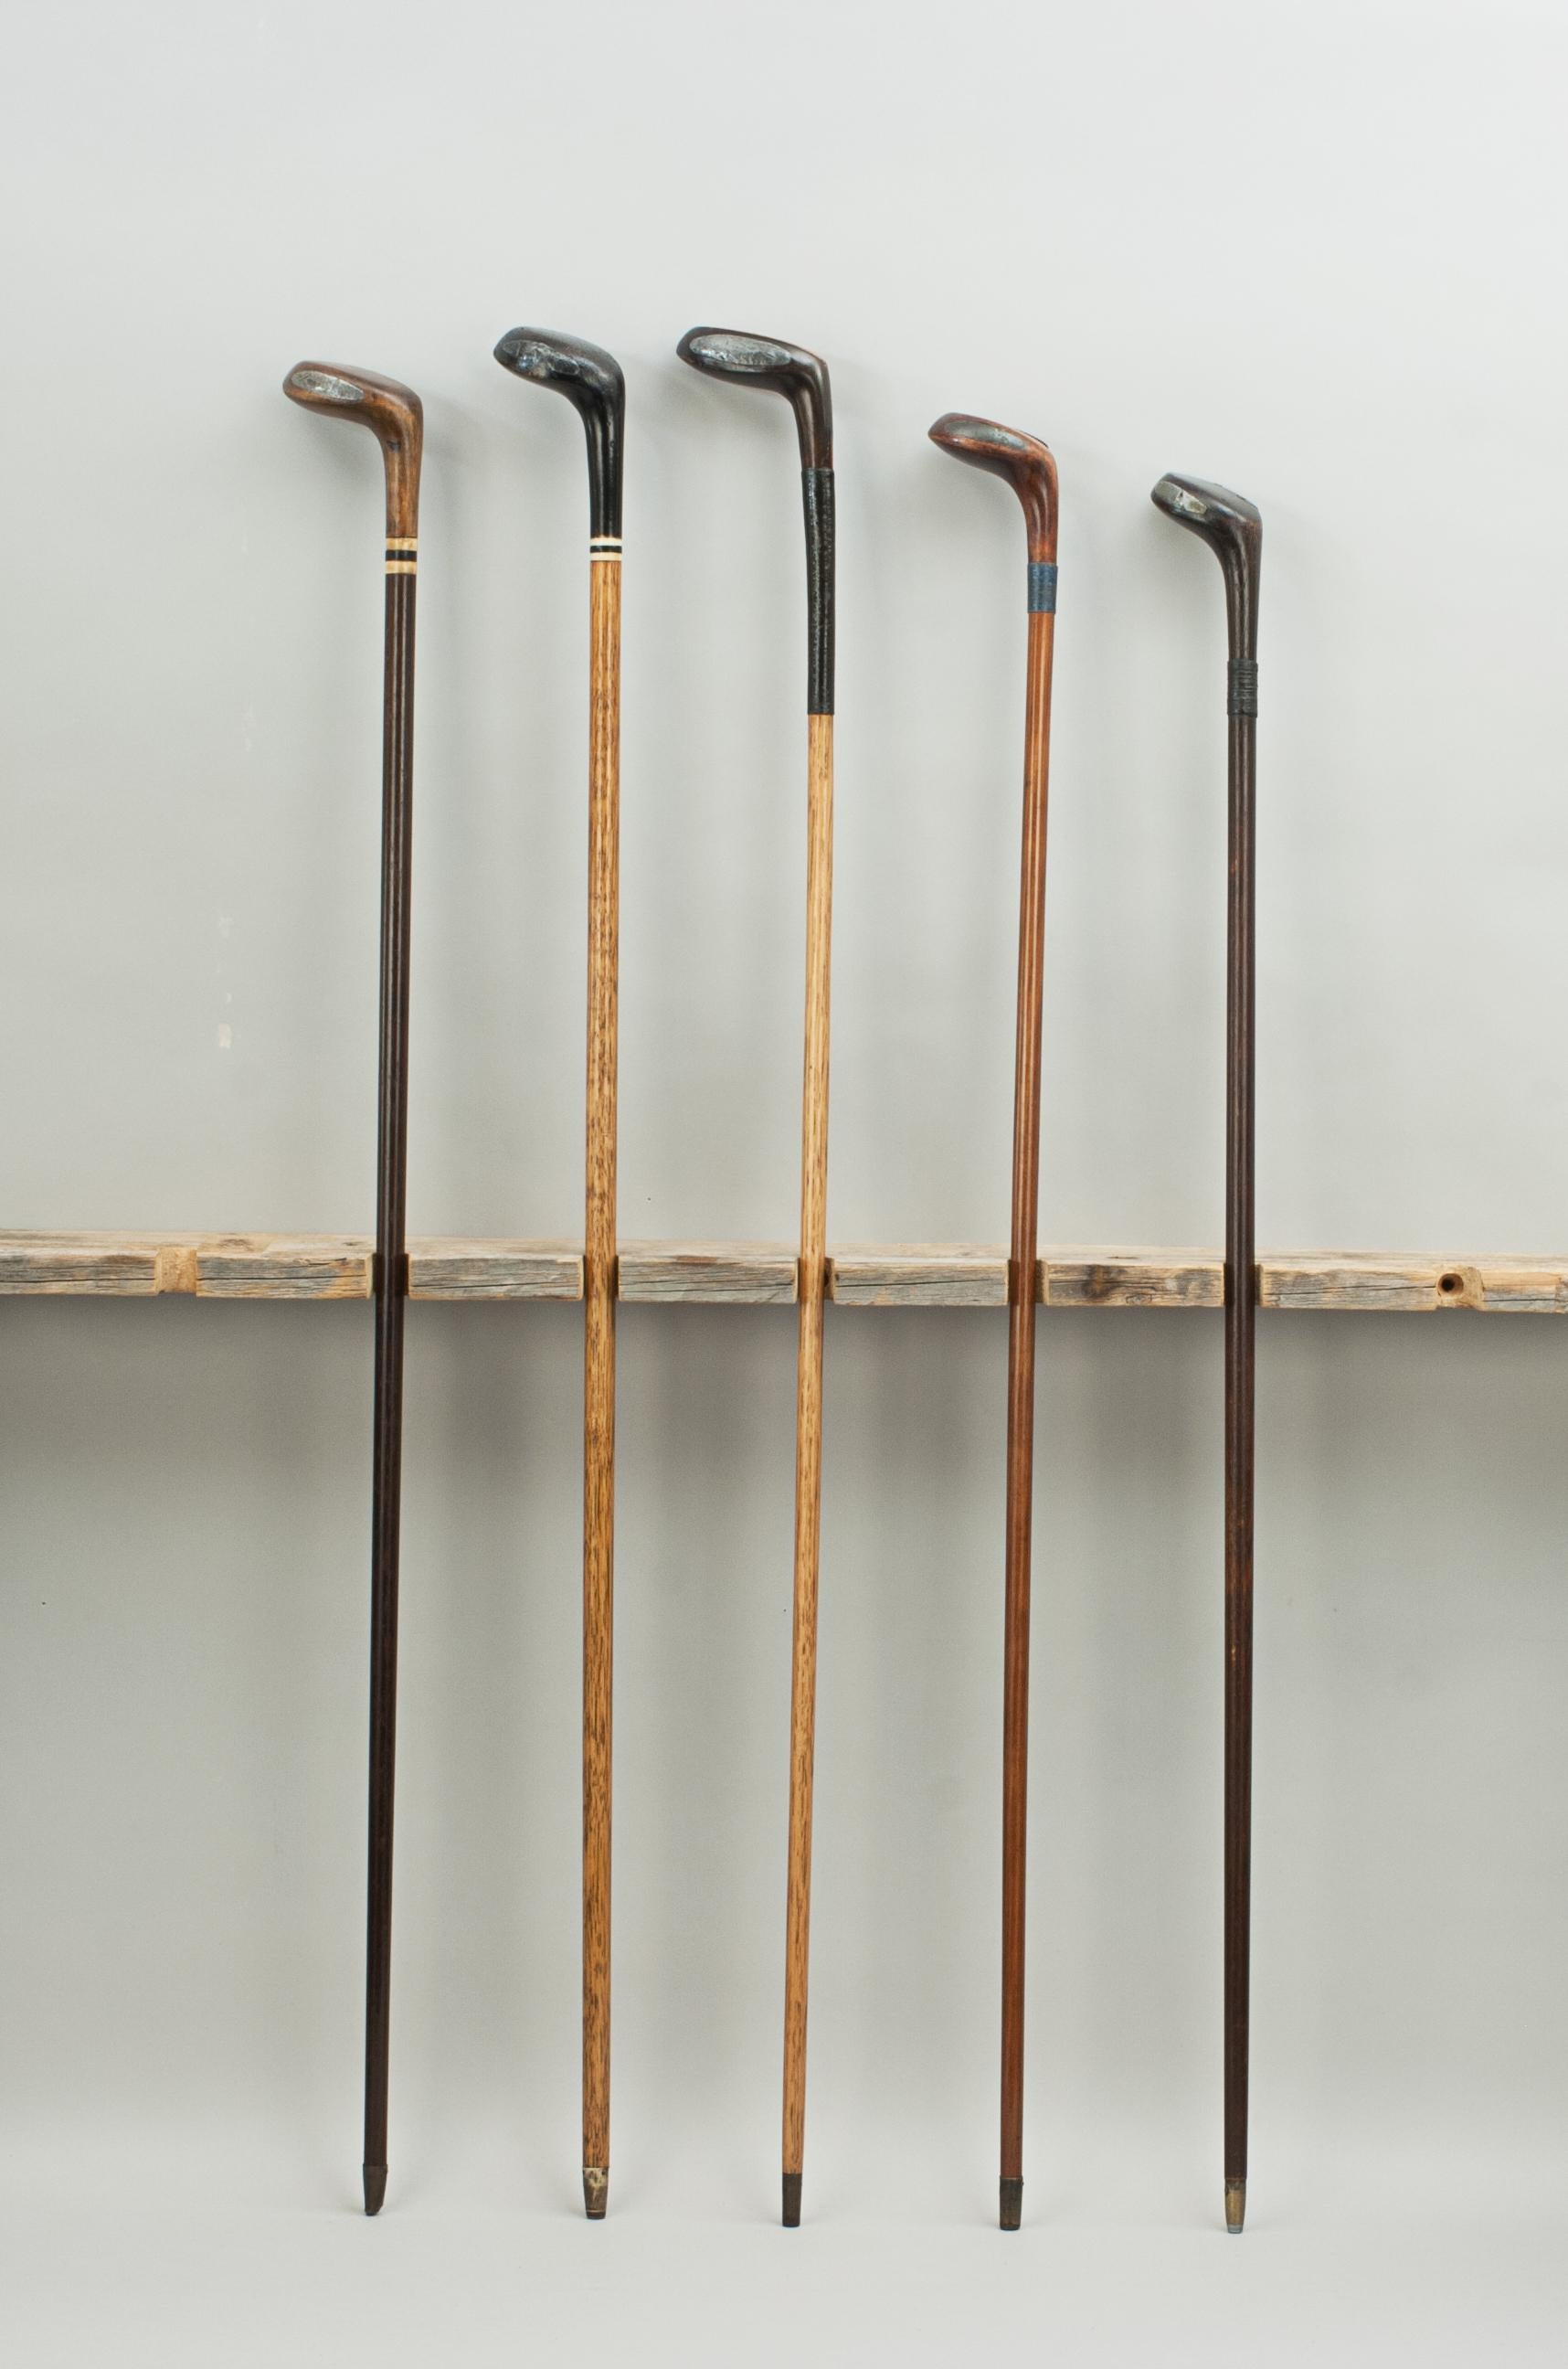 Sporting Art Antique Golf Club Walking Stick Collection of 16 Canes, Sunday Clubs